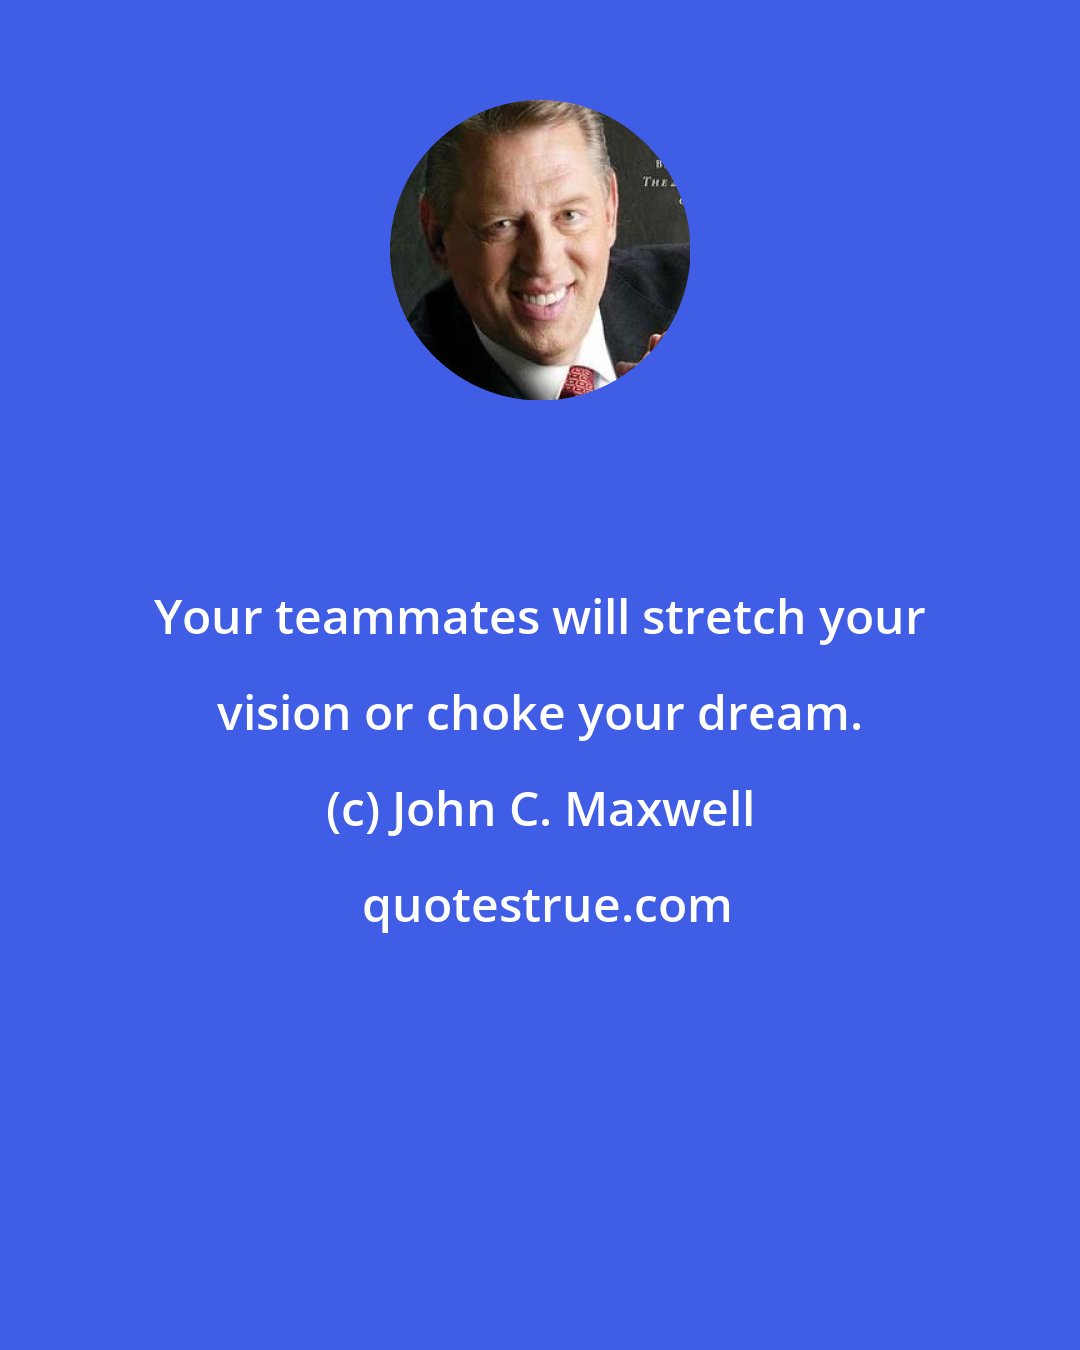 John C. Maxwell: Your teammates will stretch your vision or choke your dream.